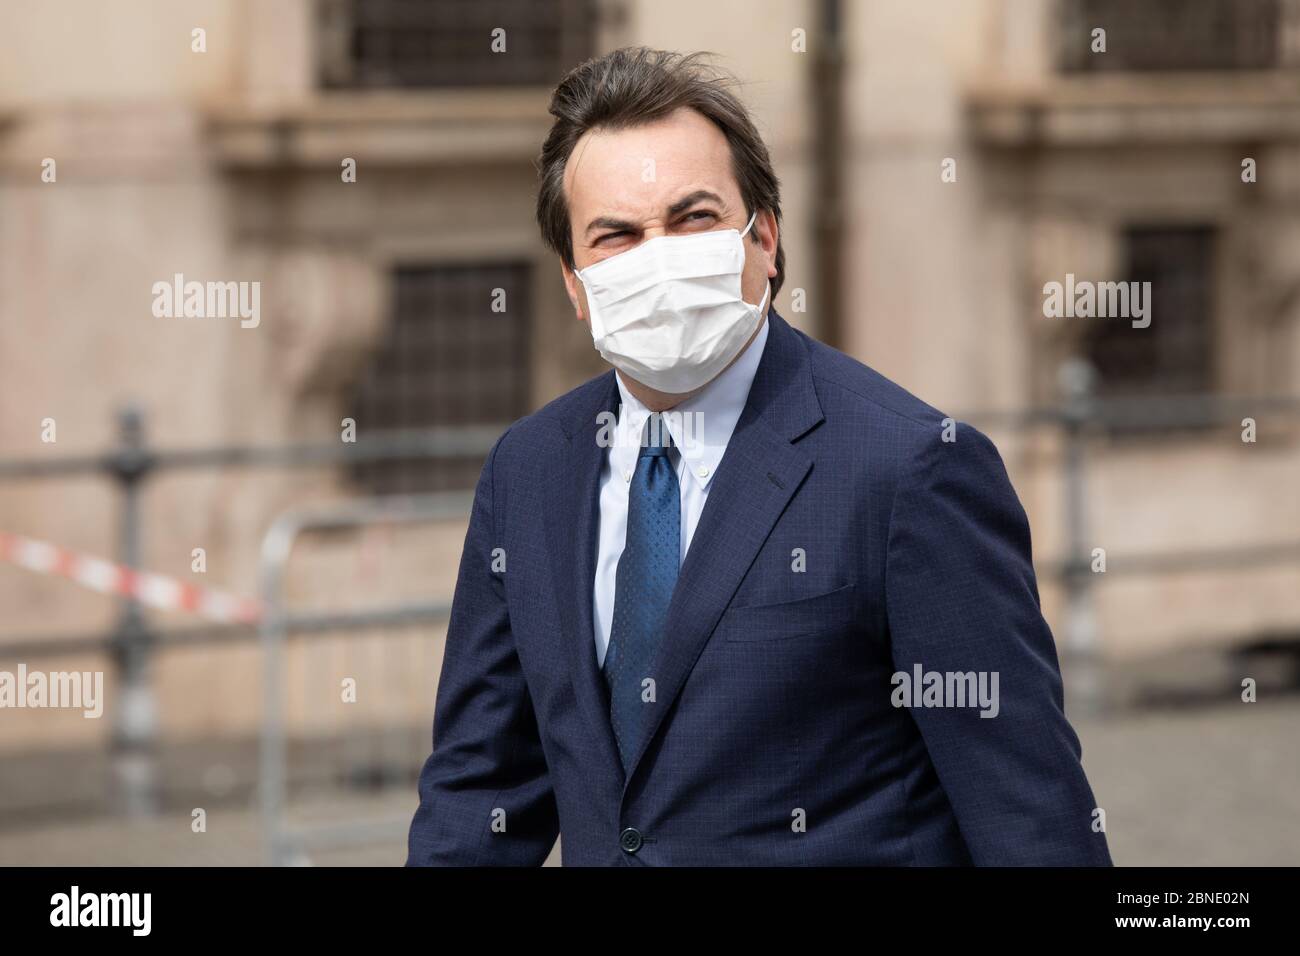 Italian Minister for European Affairs, Vincenzo Amendola, enters Palazzo Chigi before the Council of Ministers while wearing a face mask as a precaution against the spread of corona virus. Stock Photo